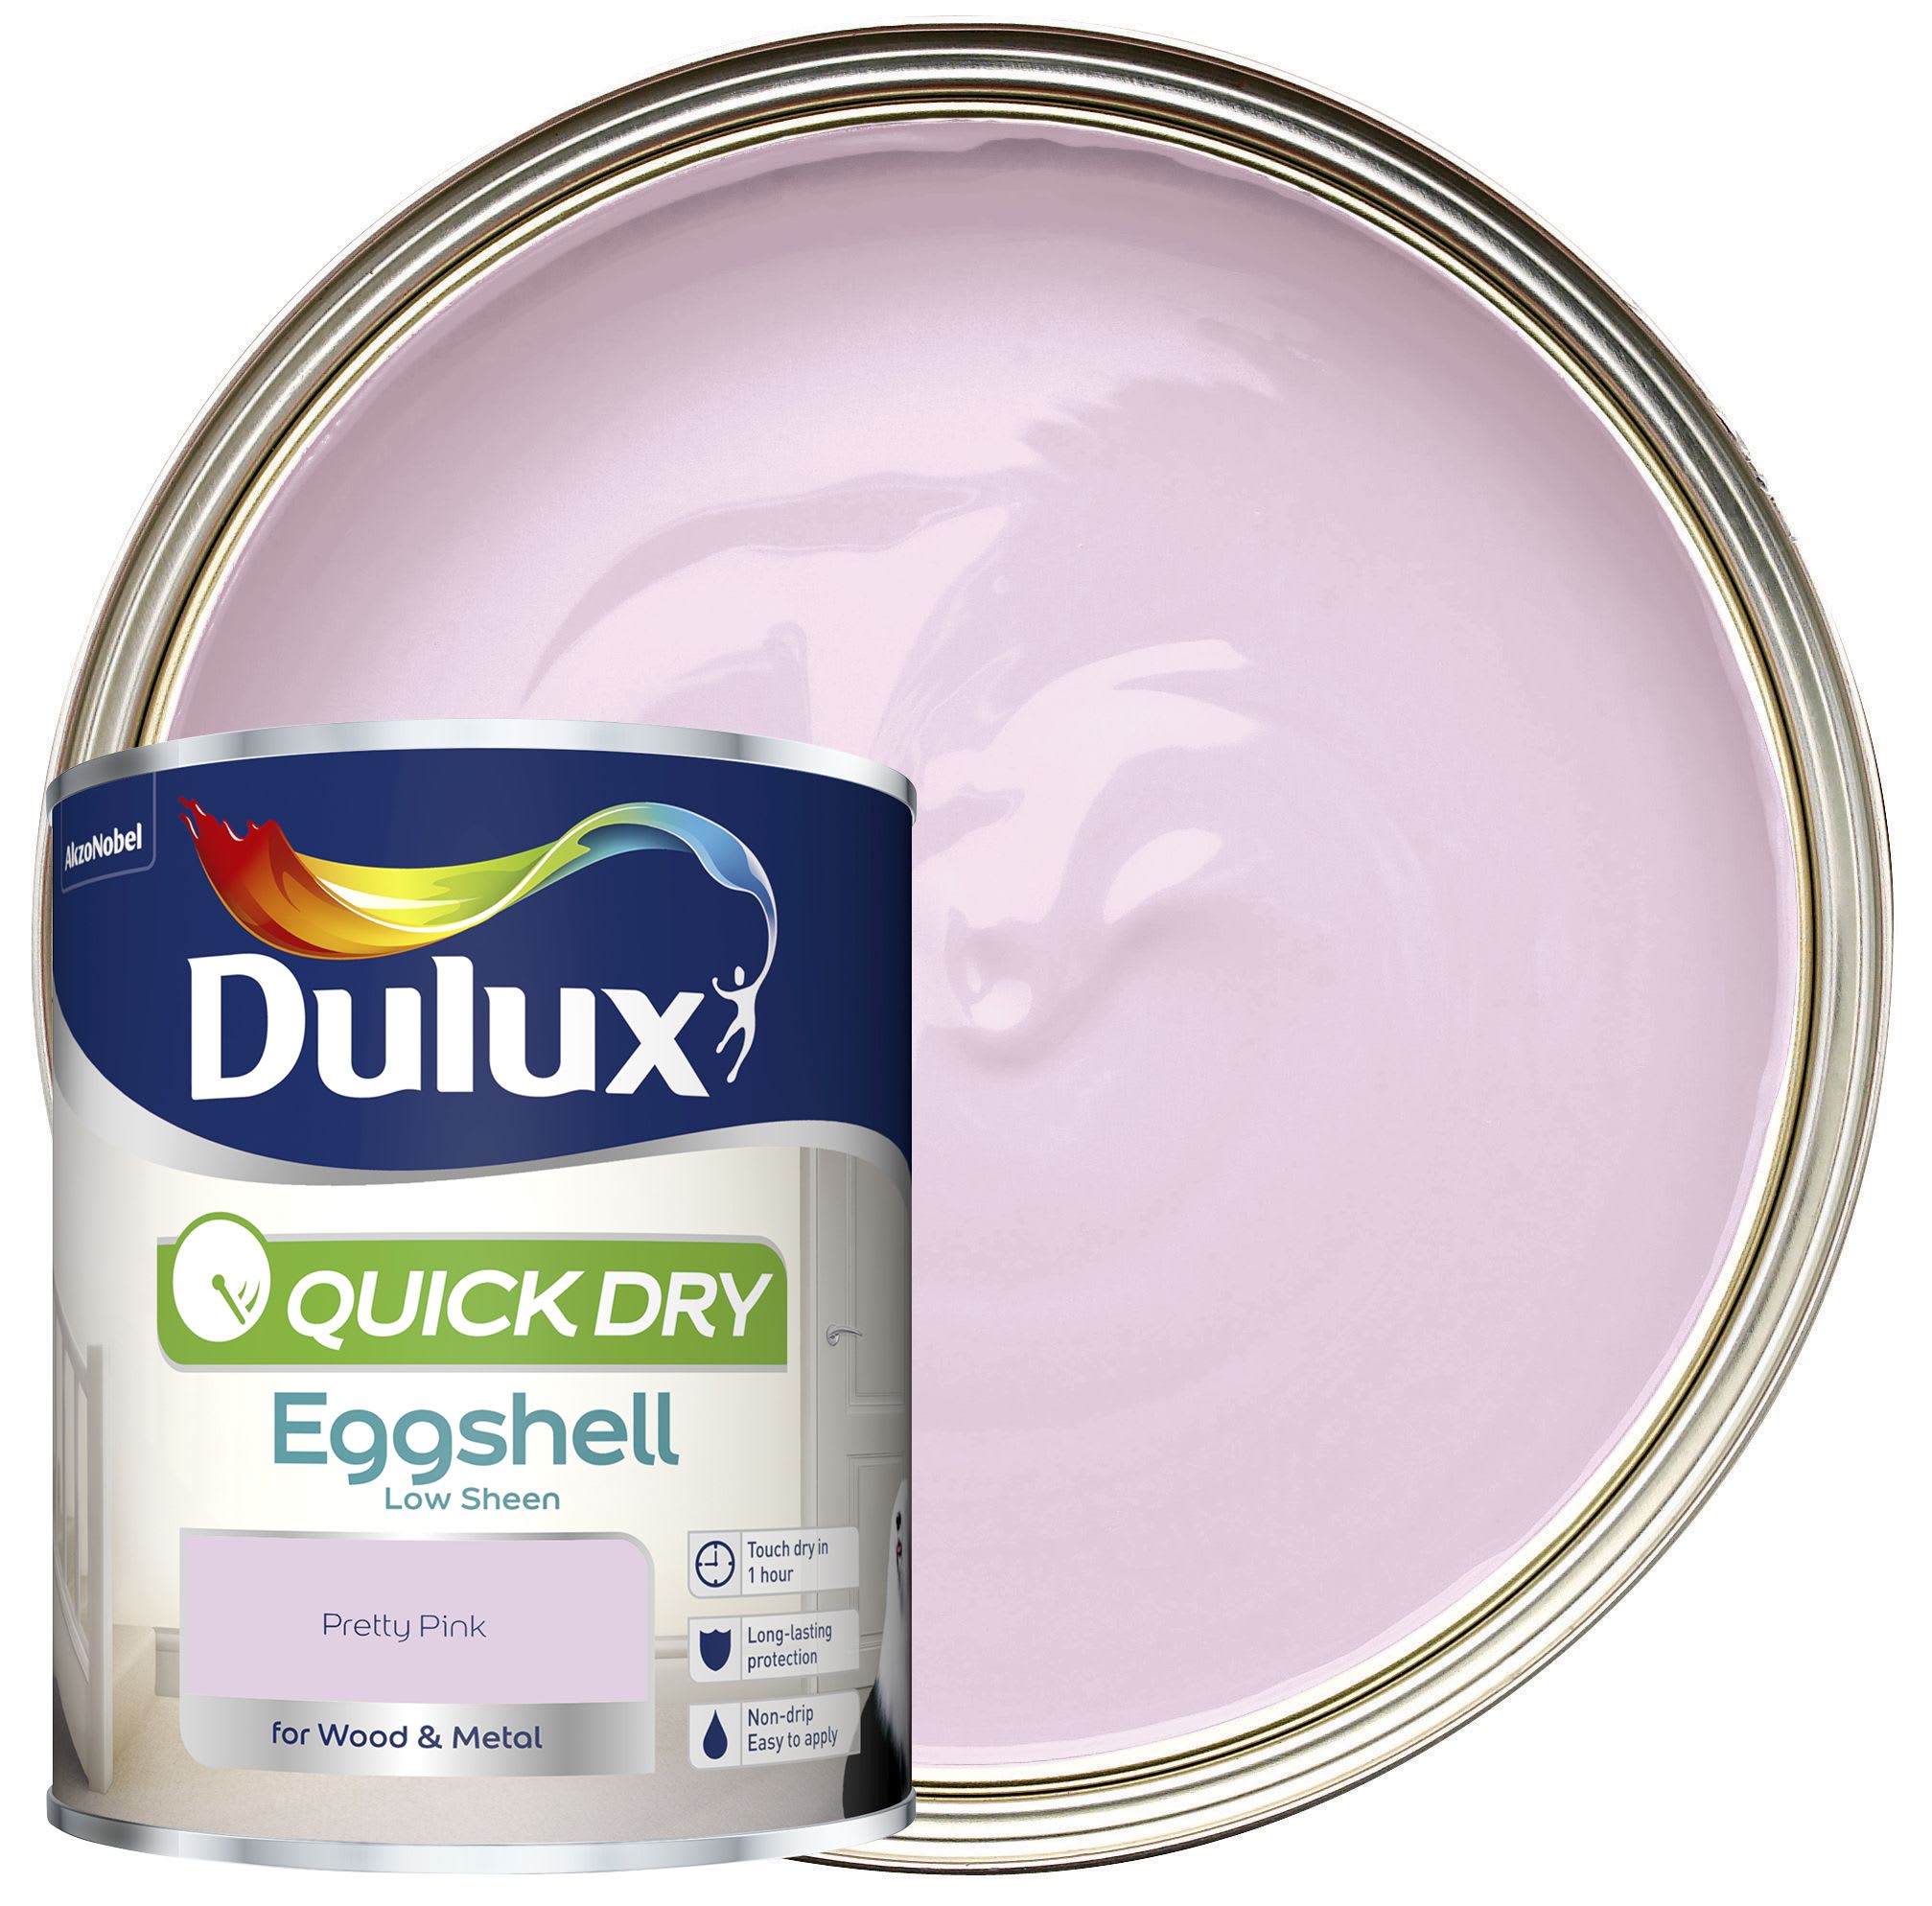 Dulux Quick Drying Eggshell Paint - Pretty Pink